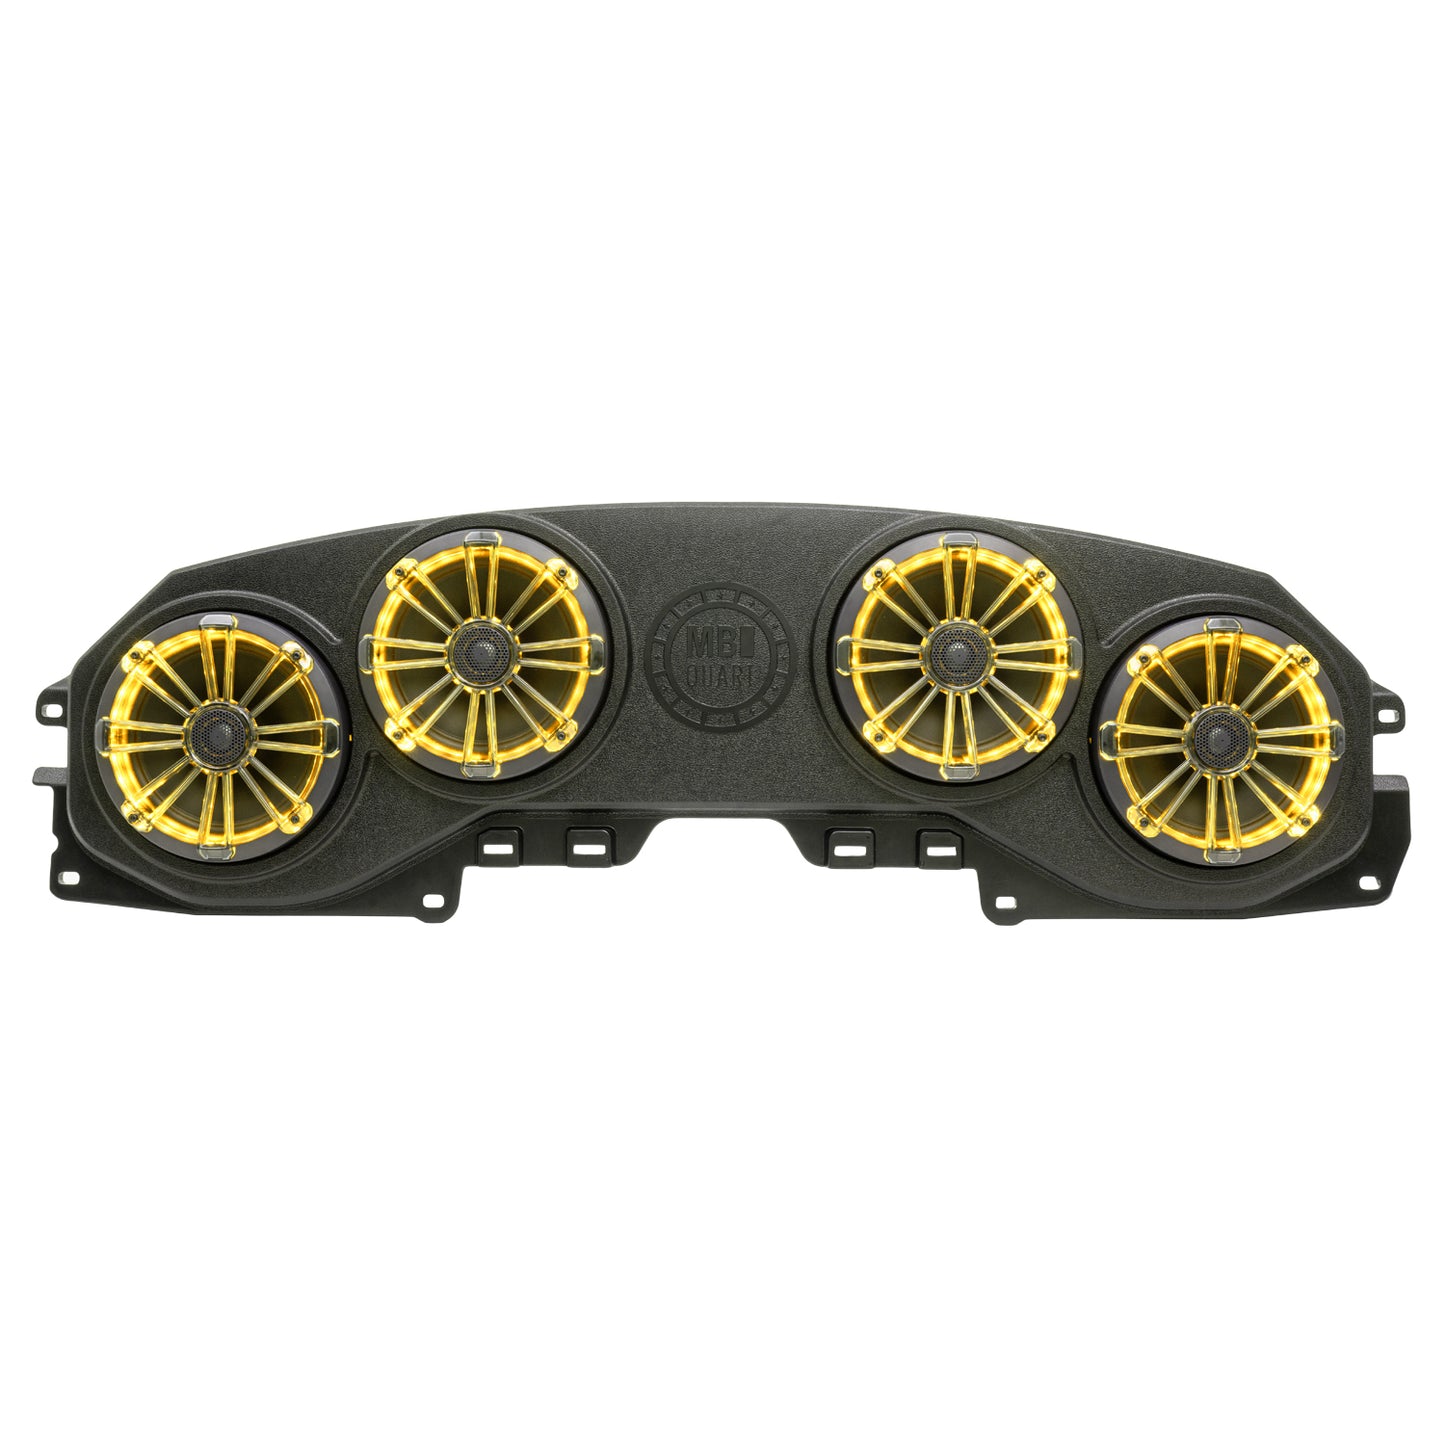 MB Quart Tuned Rear Soundbar with 8 Inch Coaxial Speakers, Enclosure, and RGB LED Lighting | Jeep® Wrangler (JL) / Gladiator (JT)